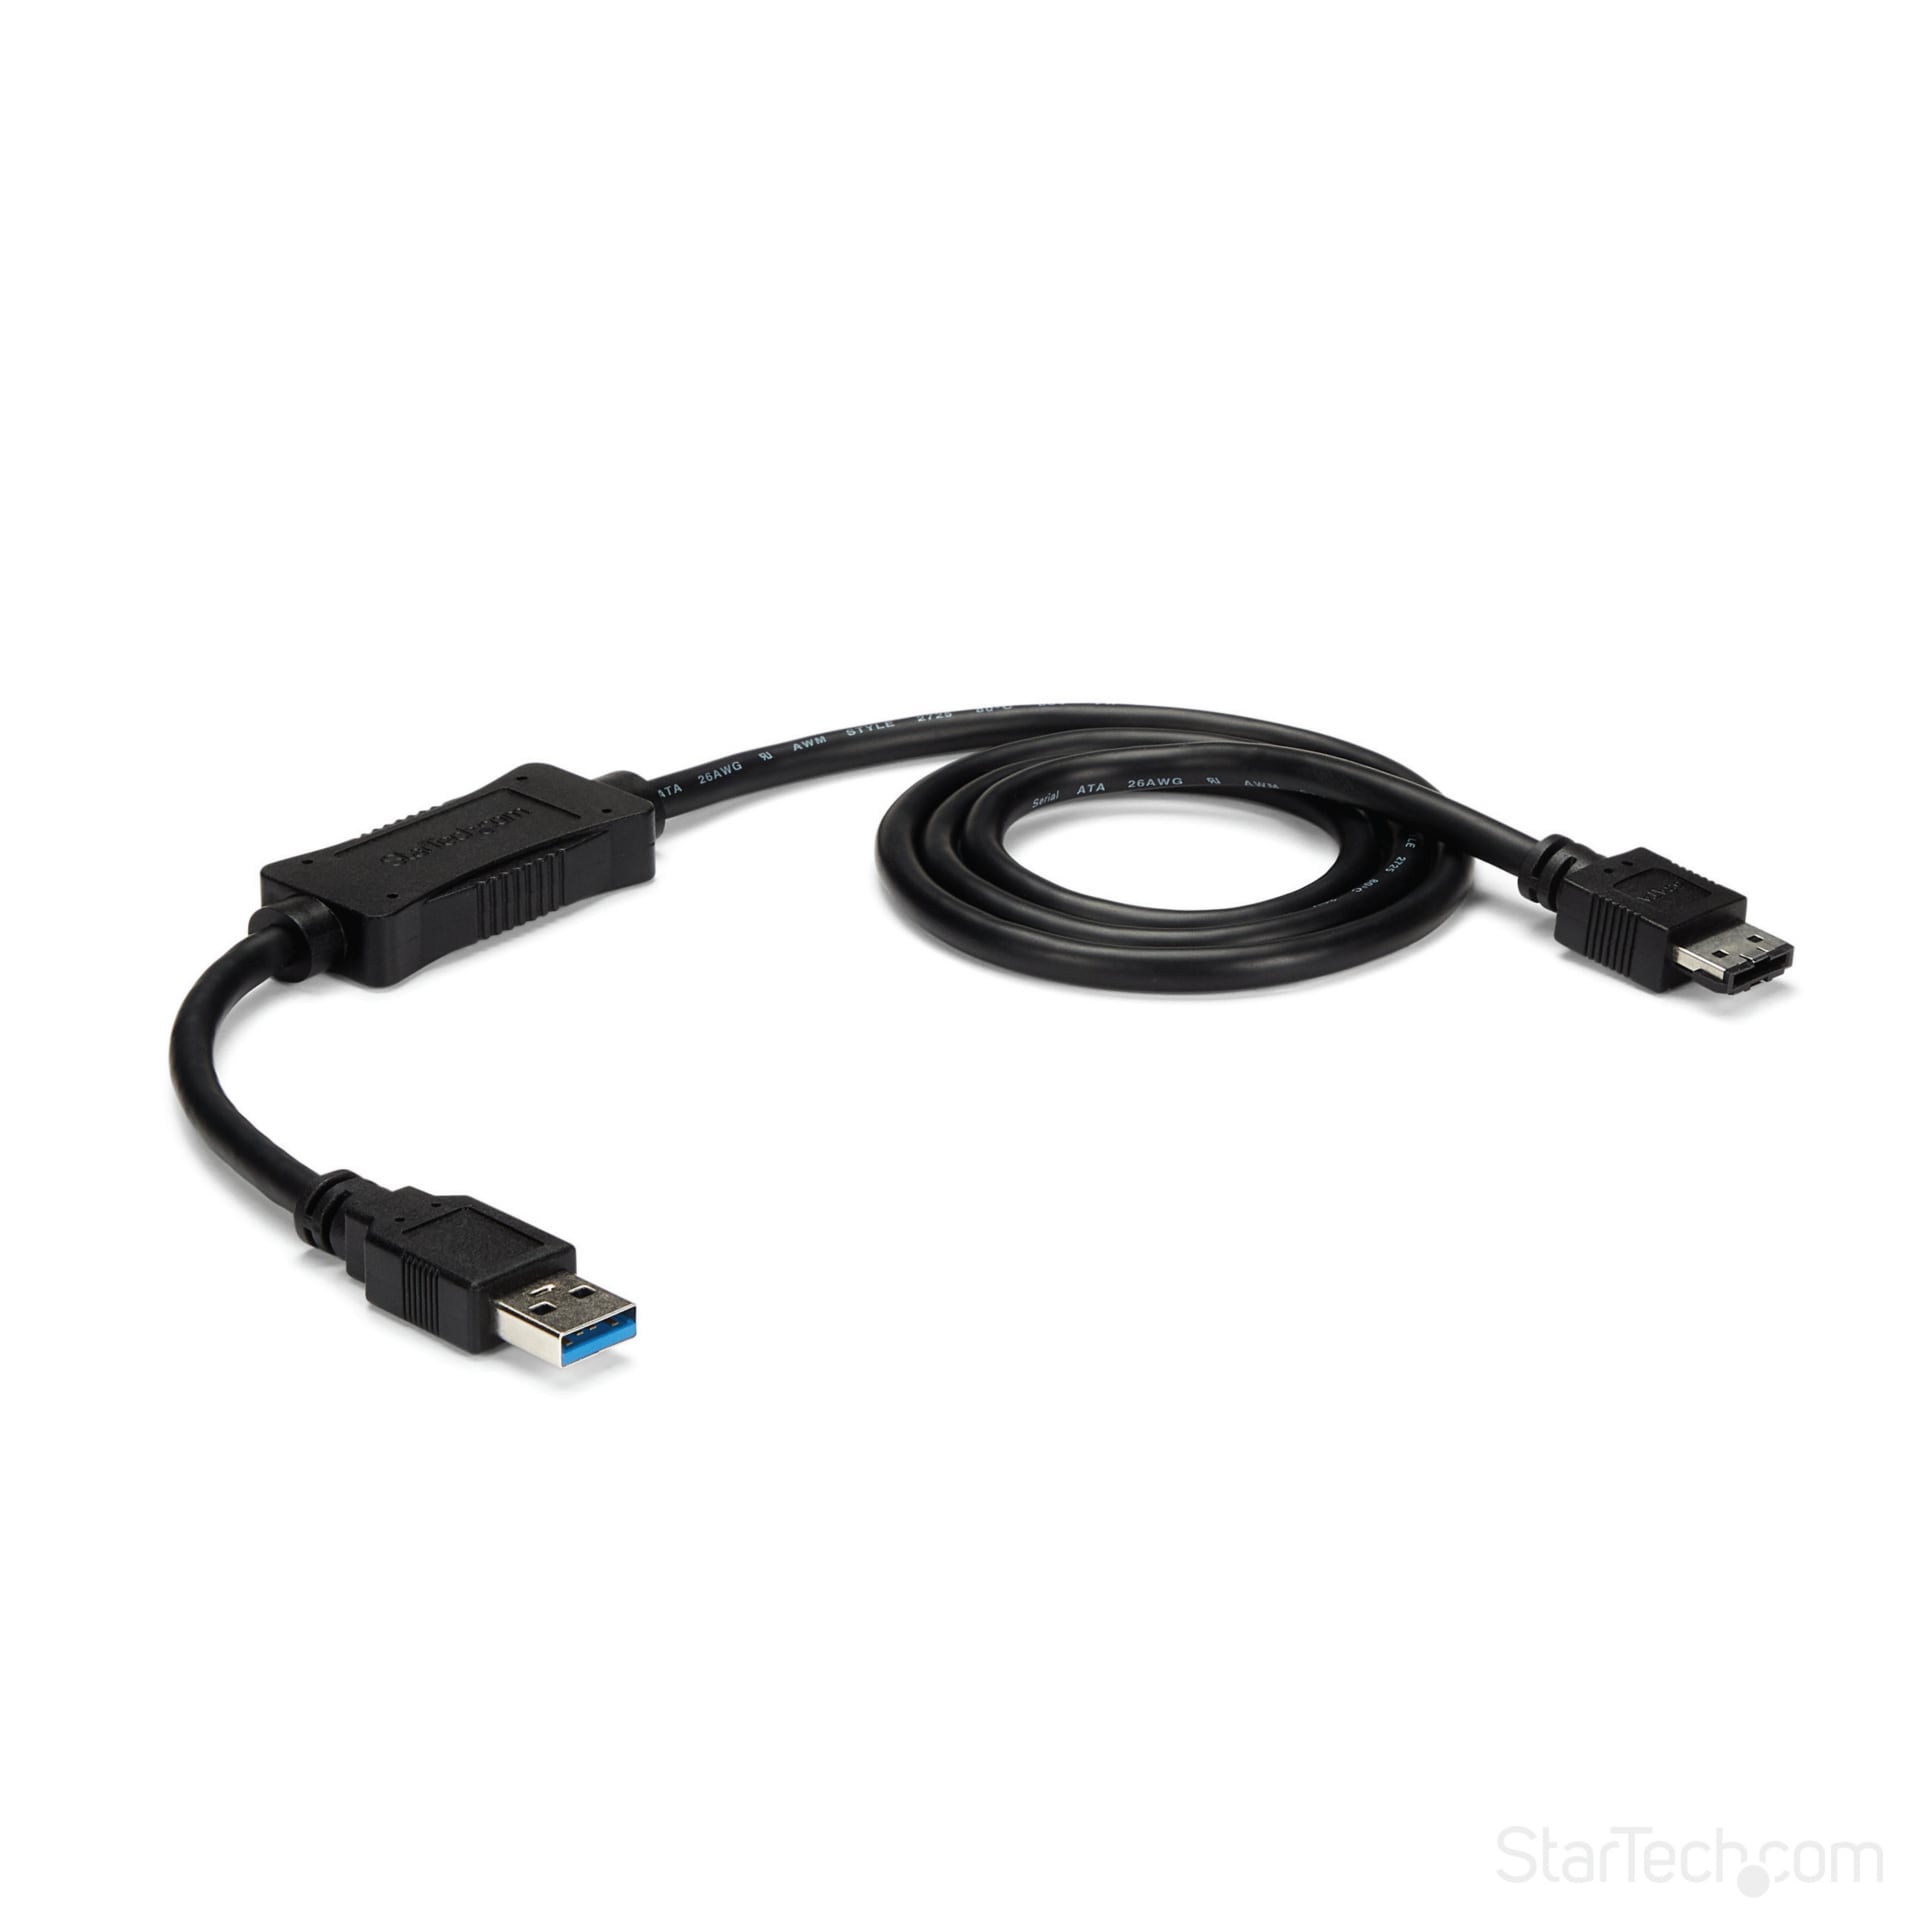 StarTech.com USB 3.0 to eSATA HDD/SSD/ODD Adapter Cable - 3ft eSATA to USB